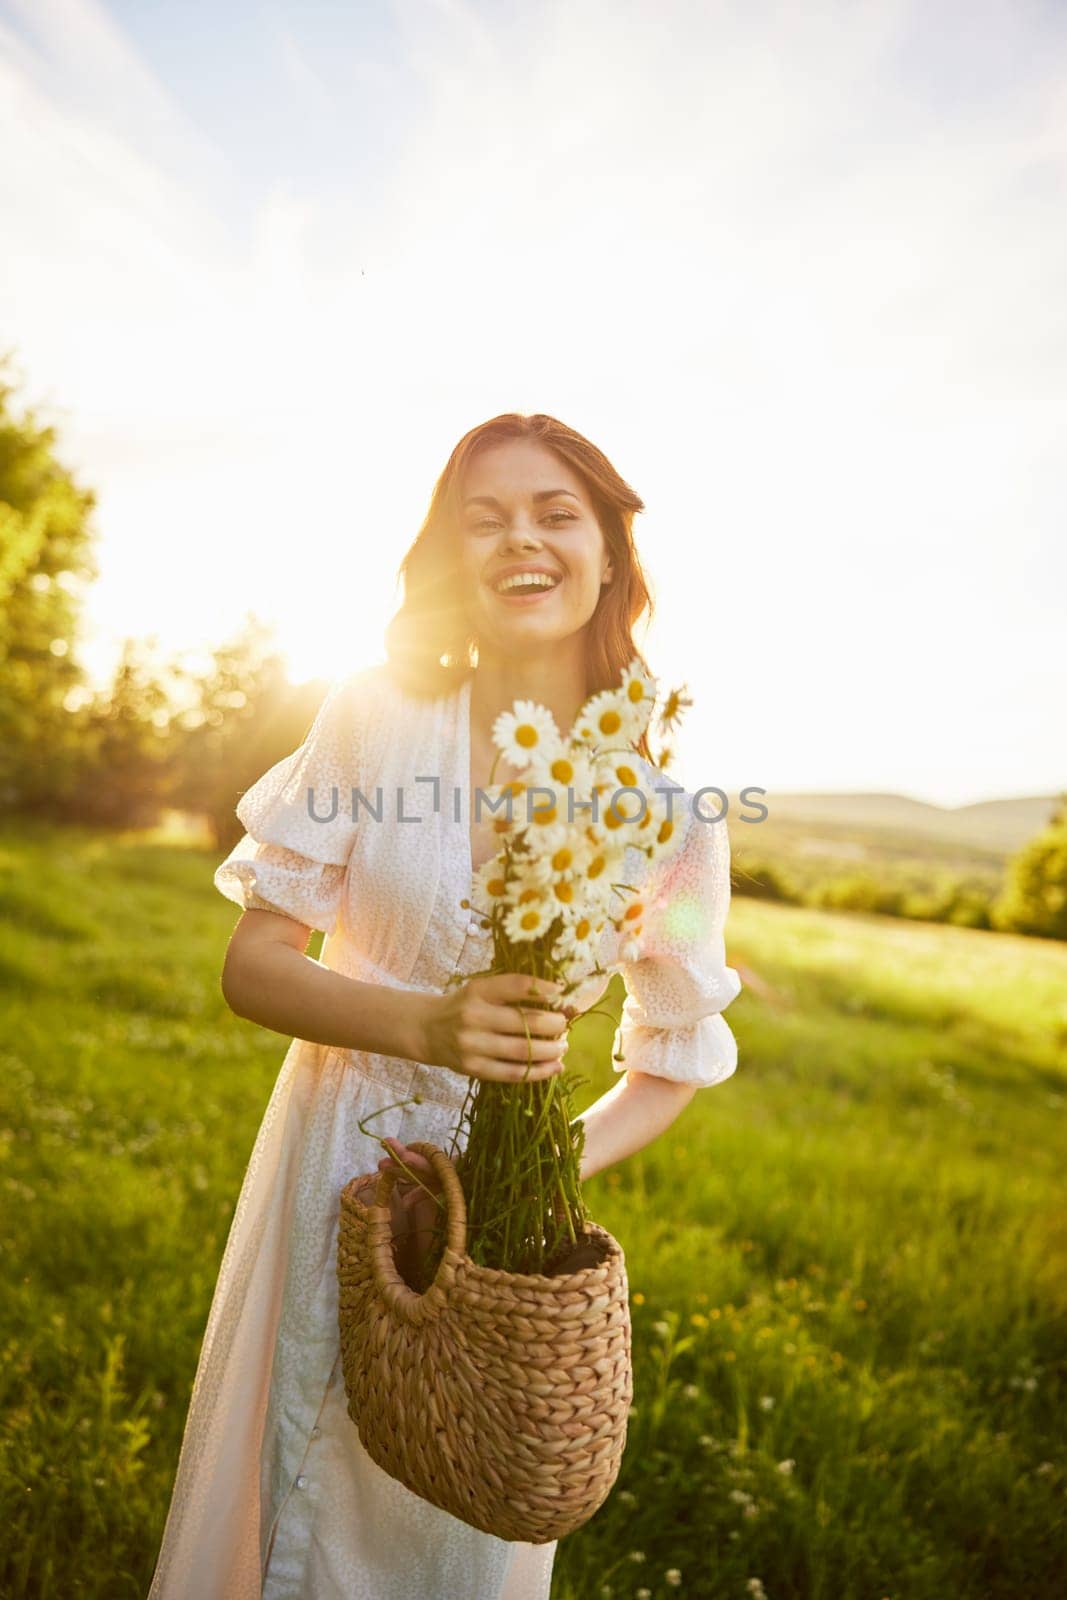 portrait of a woman in a light dress in a meadow with a bouquet of daisies and a wicker basket in her hands. High quality photo